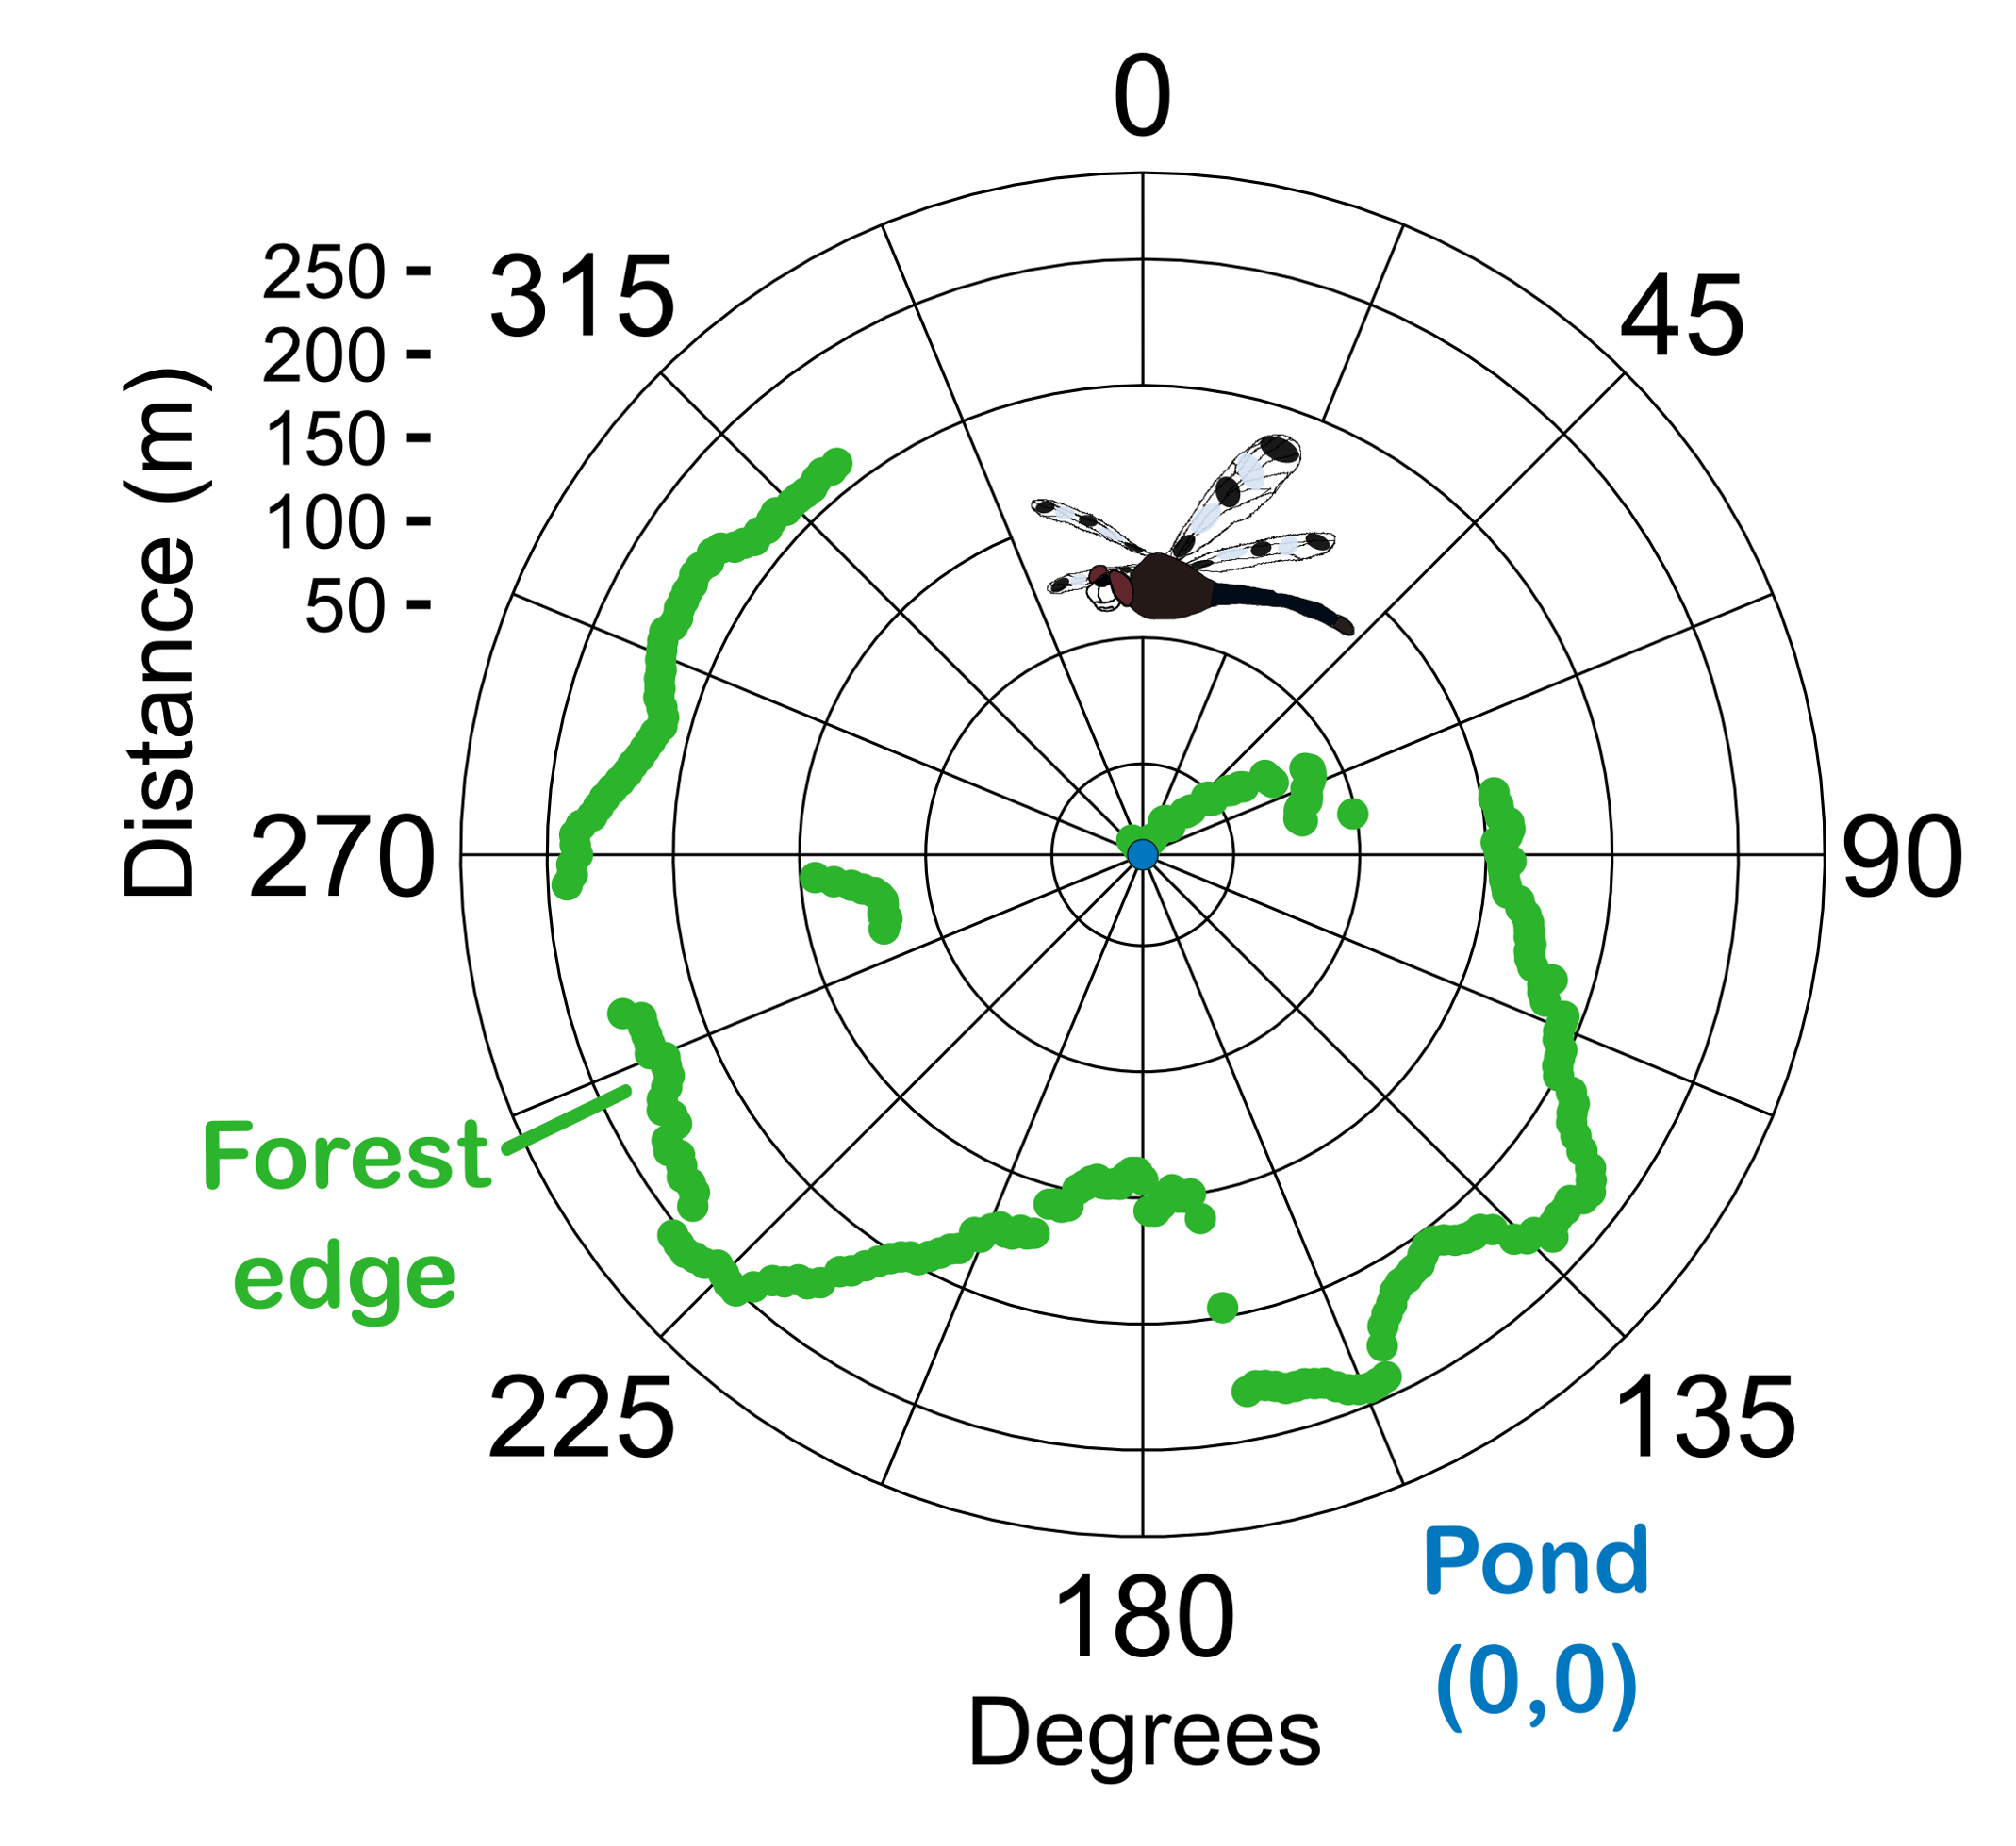 Diagram of forest edge proximity at 360 degrees around a pond